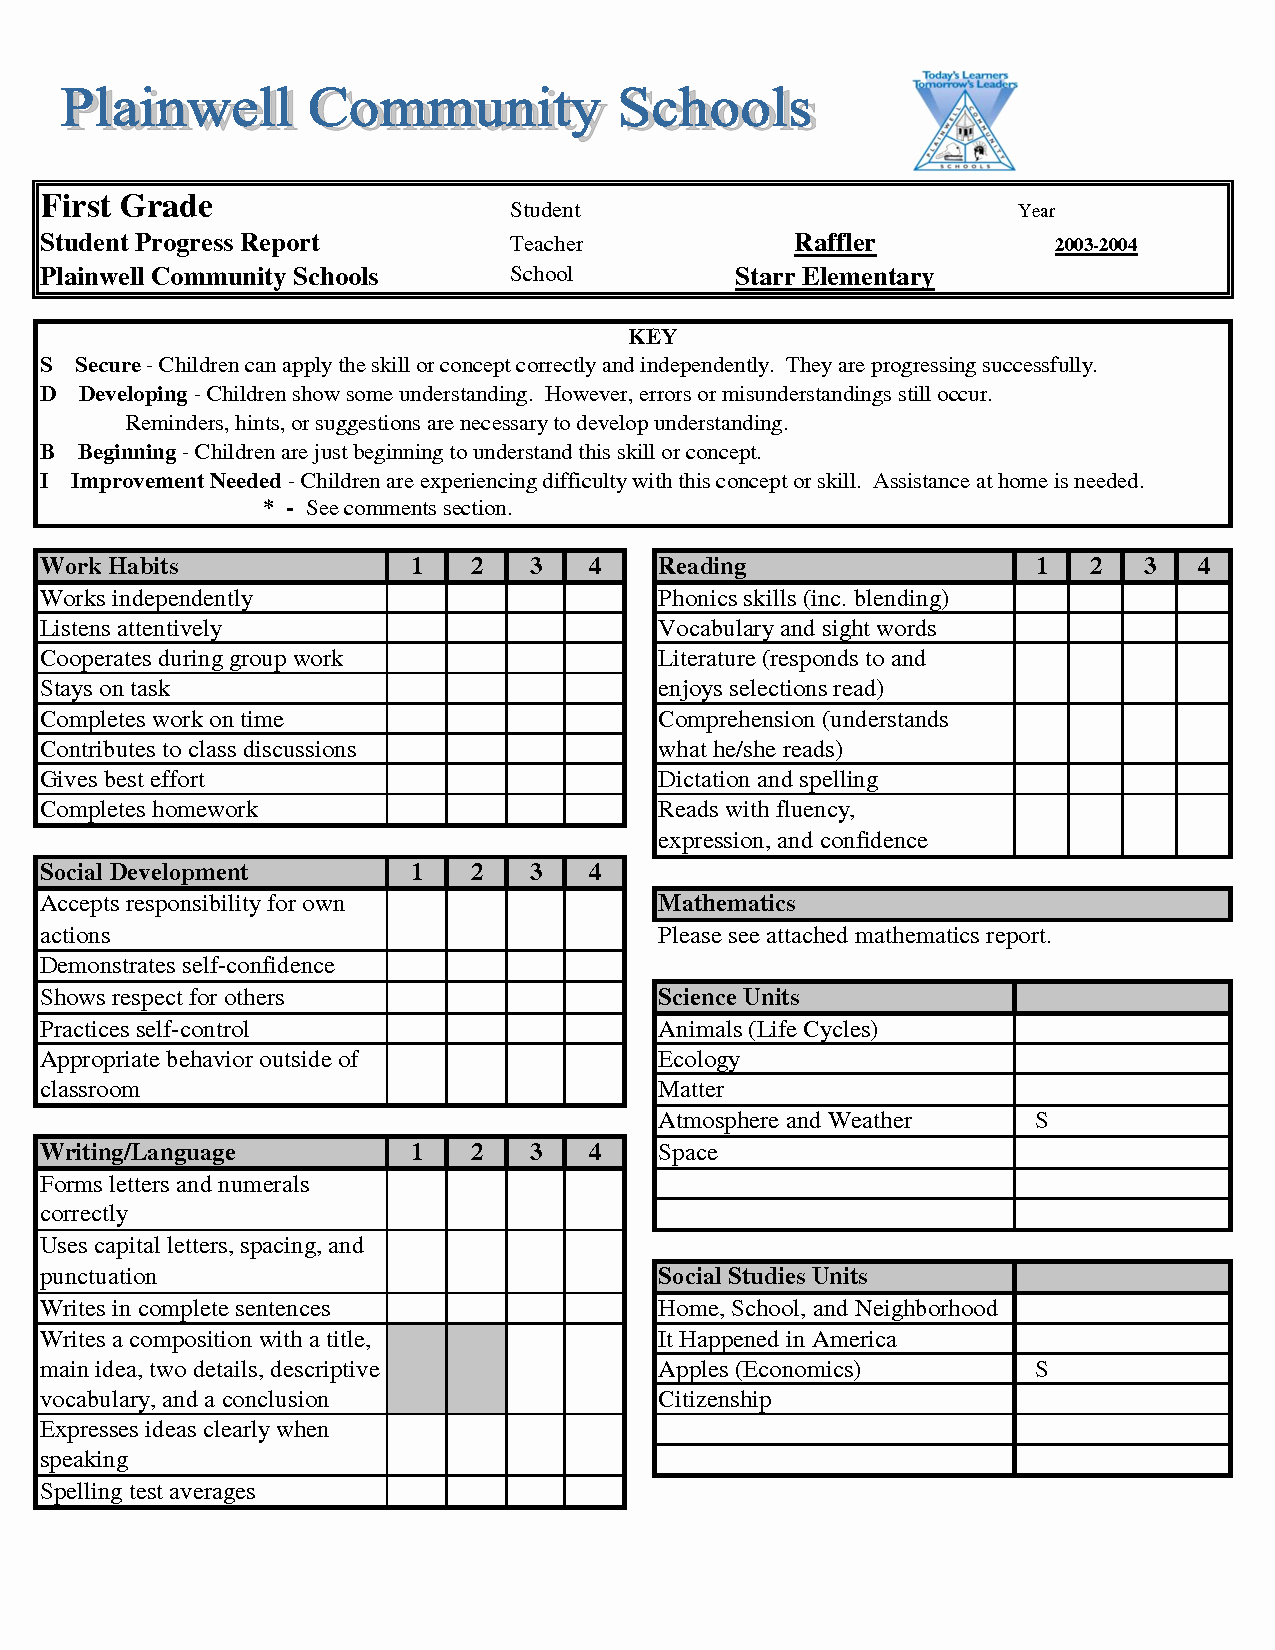 Report Card Template Free Fresh Report Card Template Excel Xls Download Legal Documents